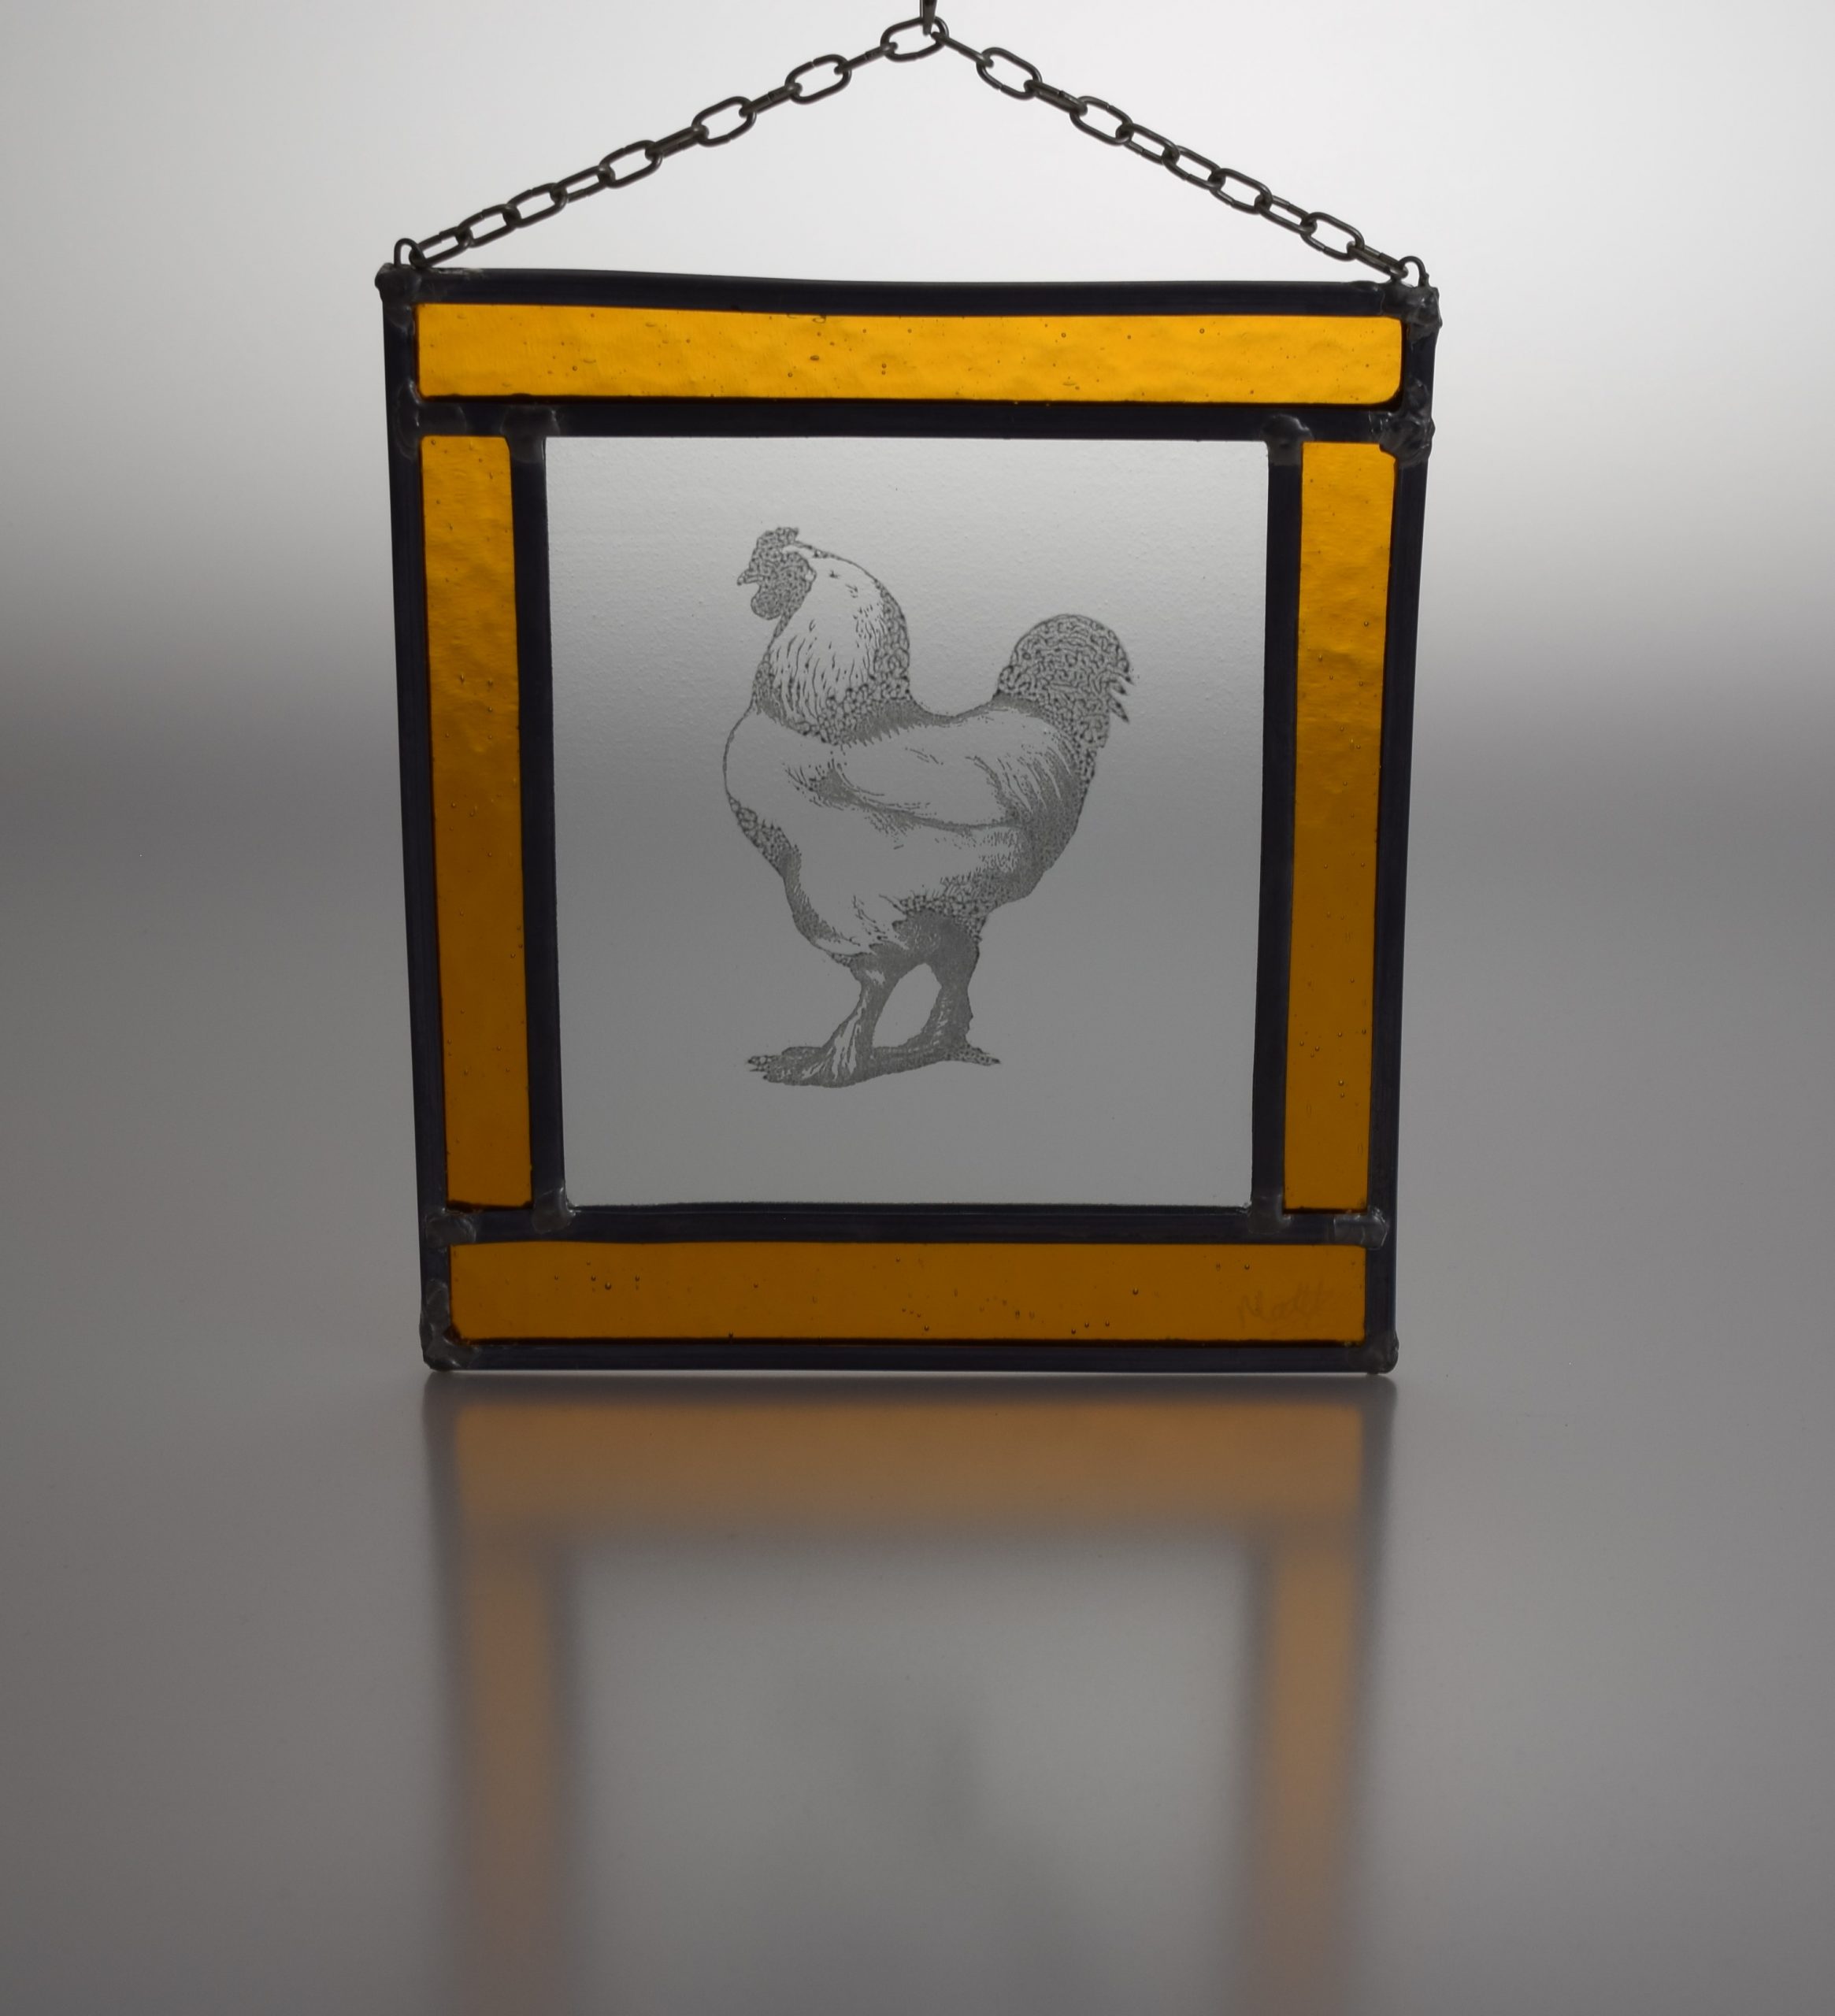 Majestic cockerel stained glass picture in egg yolk yellow frame